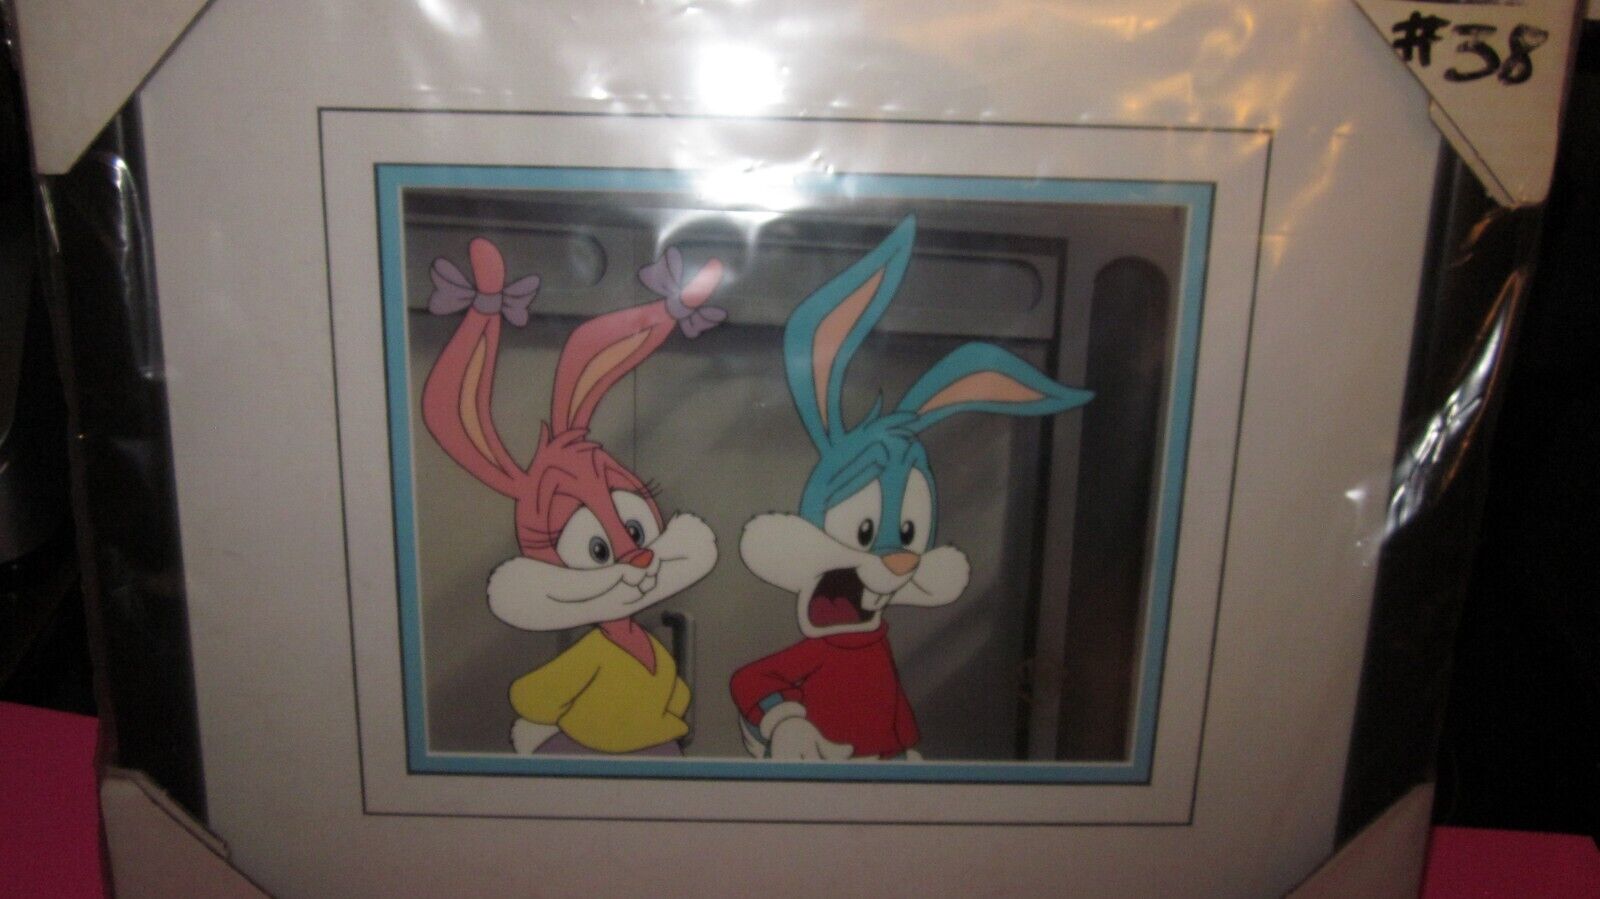 Tiny Toons Adventures-Original Production Cel-Babs/Buster Bunny-two tone town